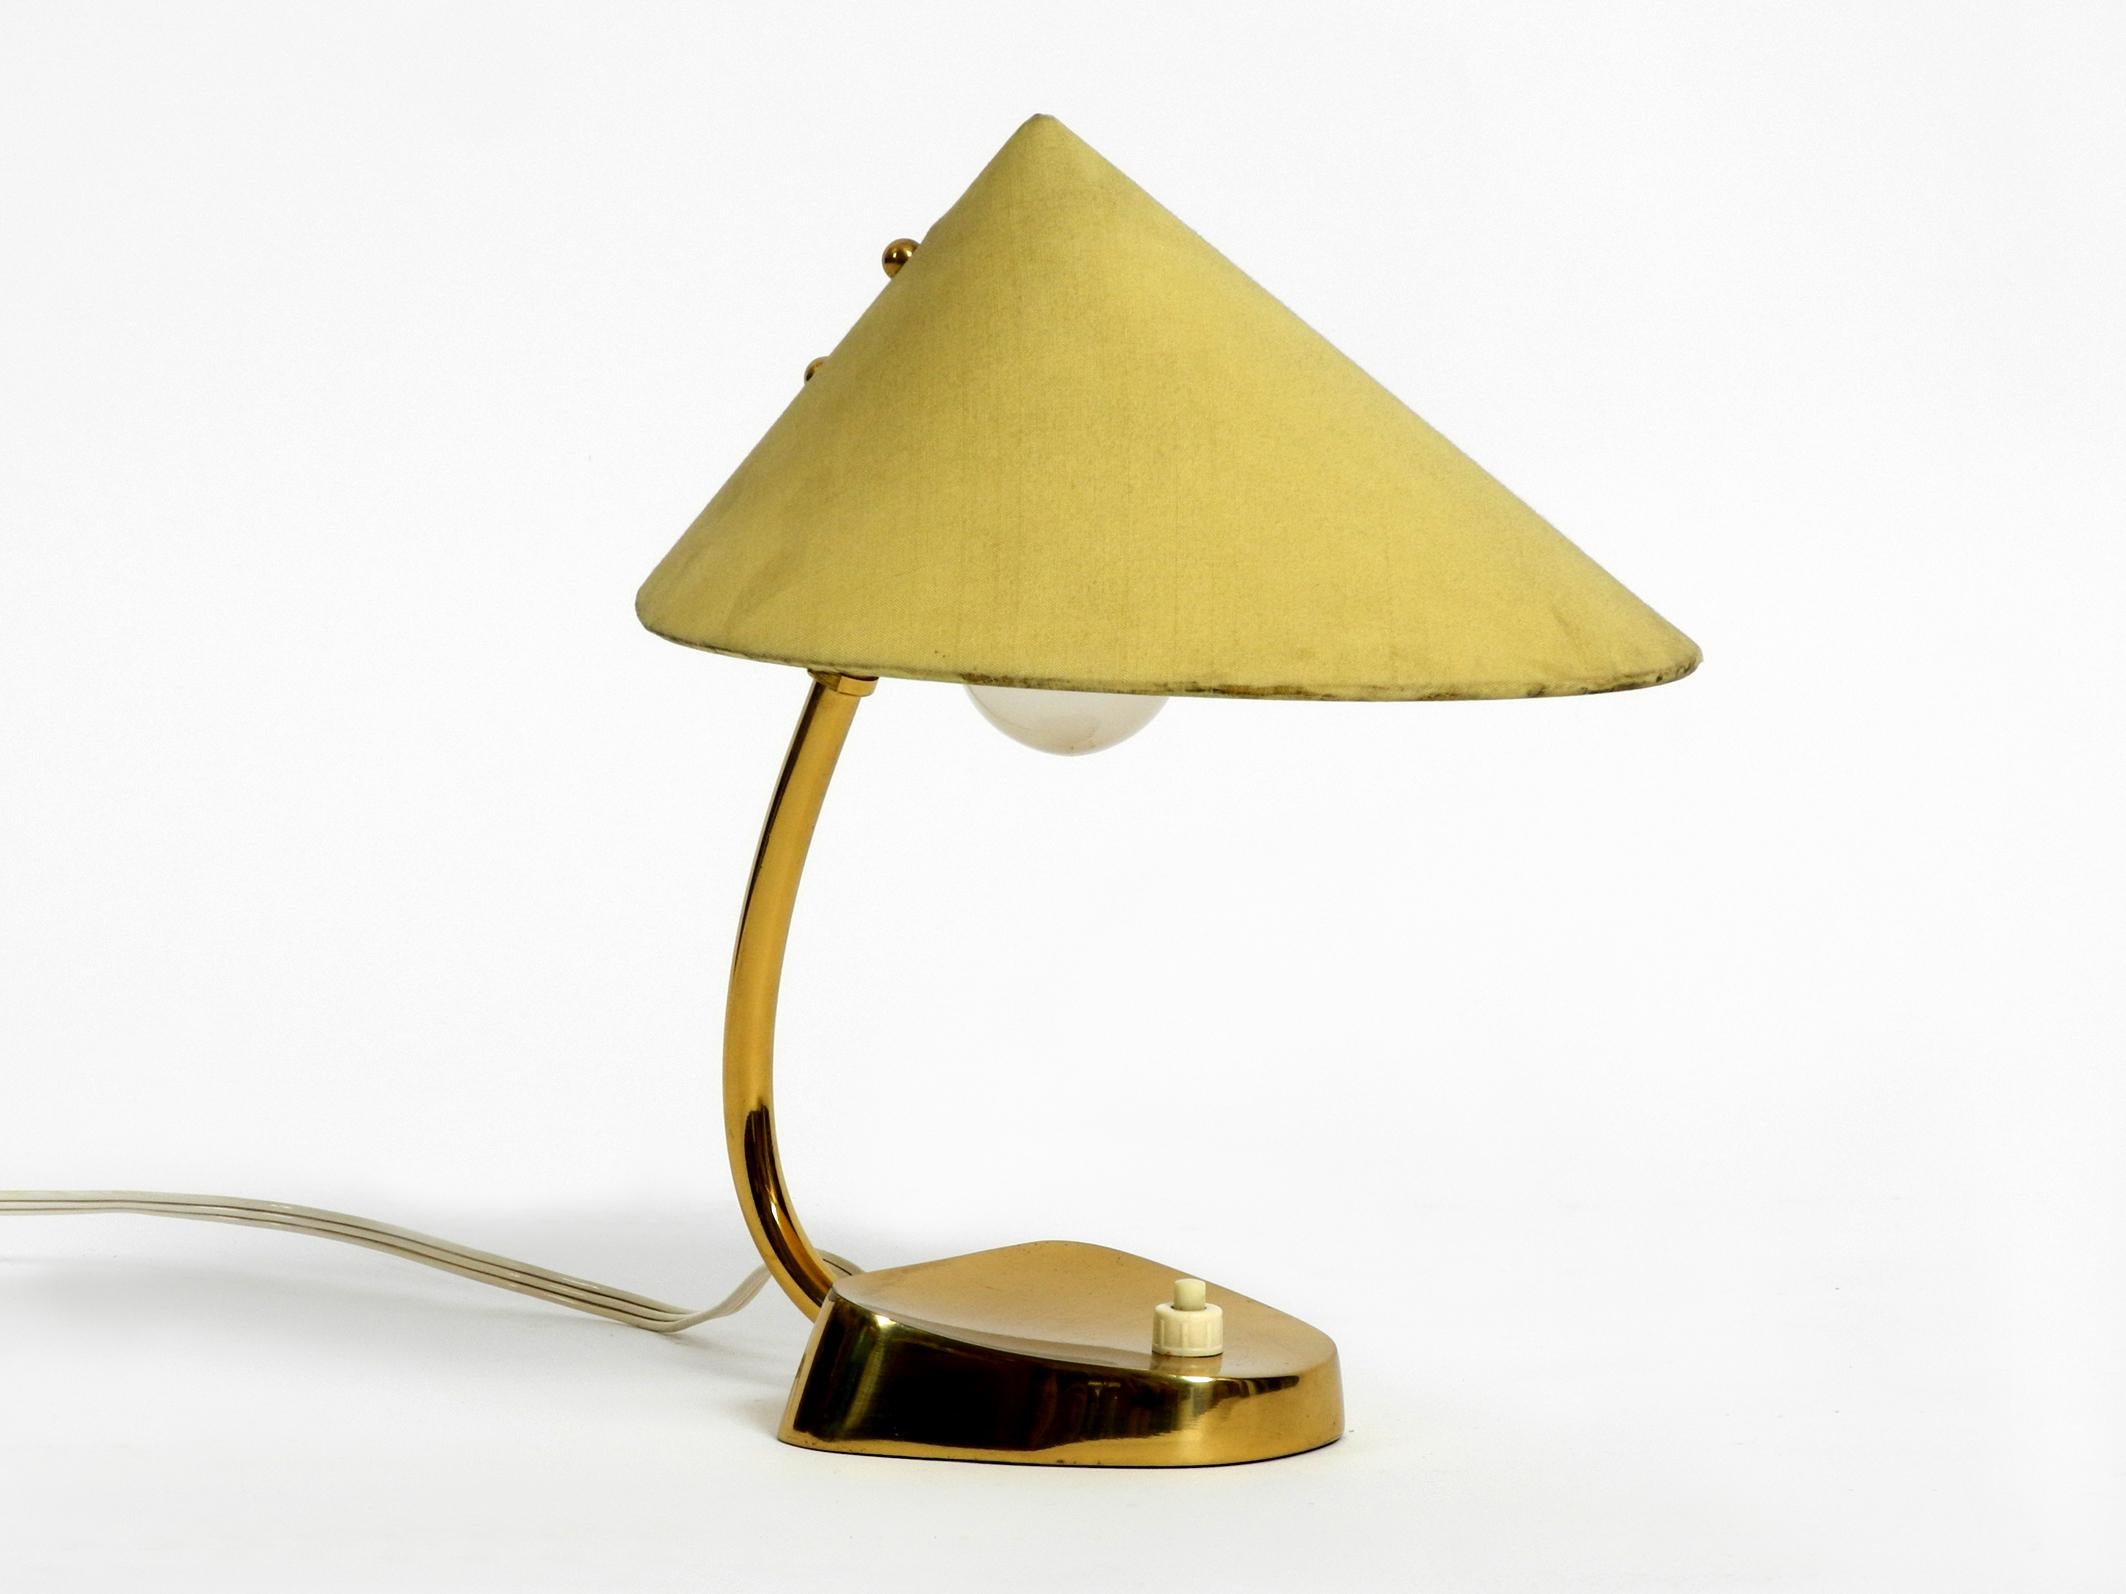 Very elegant original midcentury brass table lamp with fabric shade. 
Manufacturer J. T. Kalmar. Made in Austria in the 1950s.
Heavy brass base and neck, light green fabric shade. 
Beautiful Minimalist design for very pleasant light. 
No damage